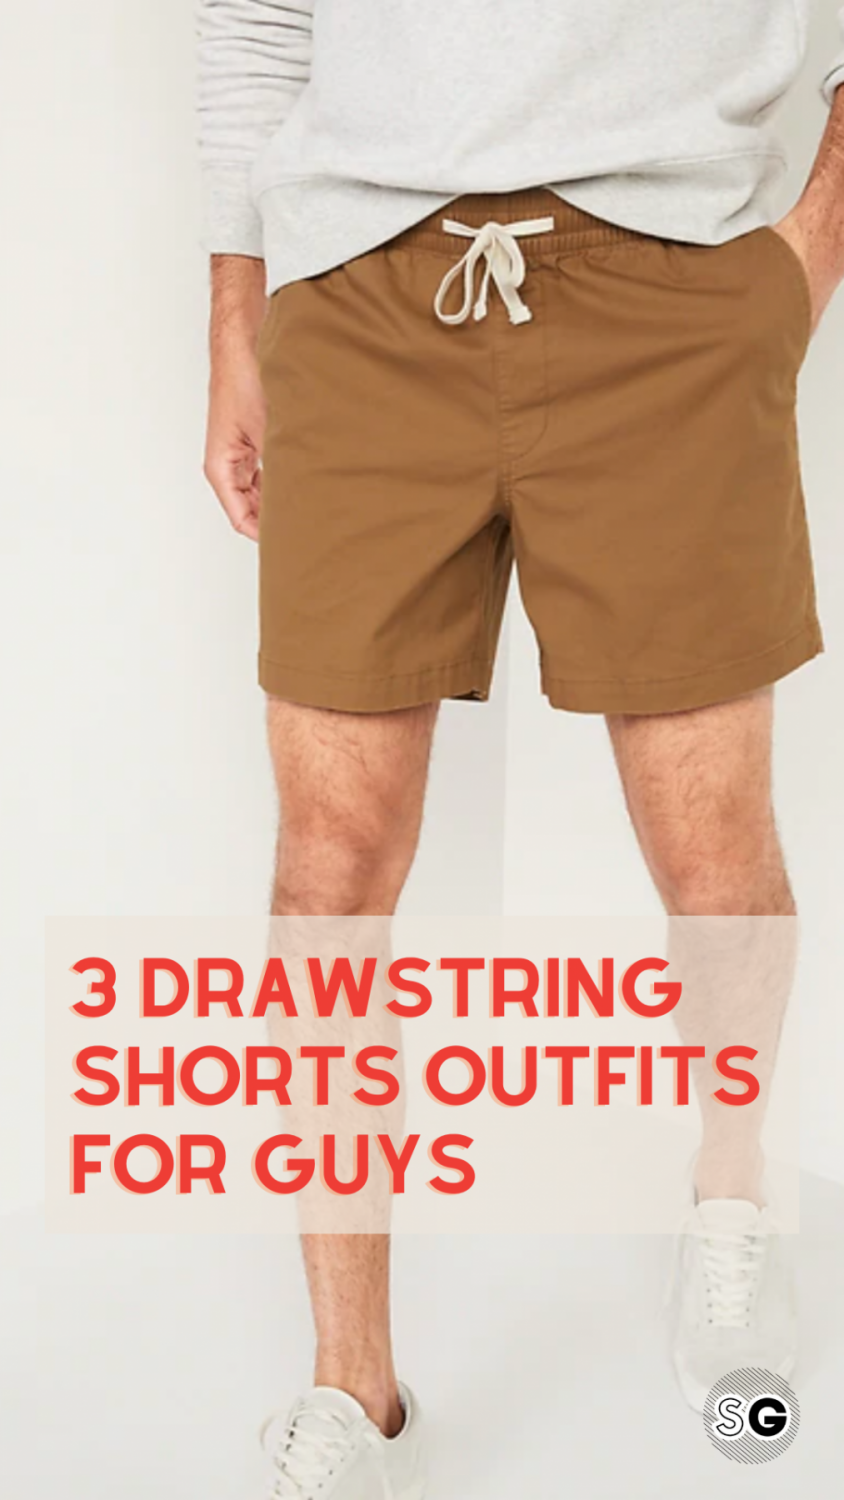 2022 drawstring shorts outfits for guys